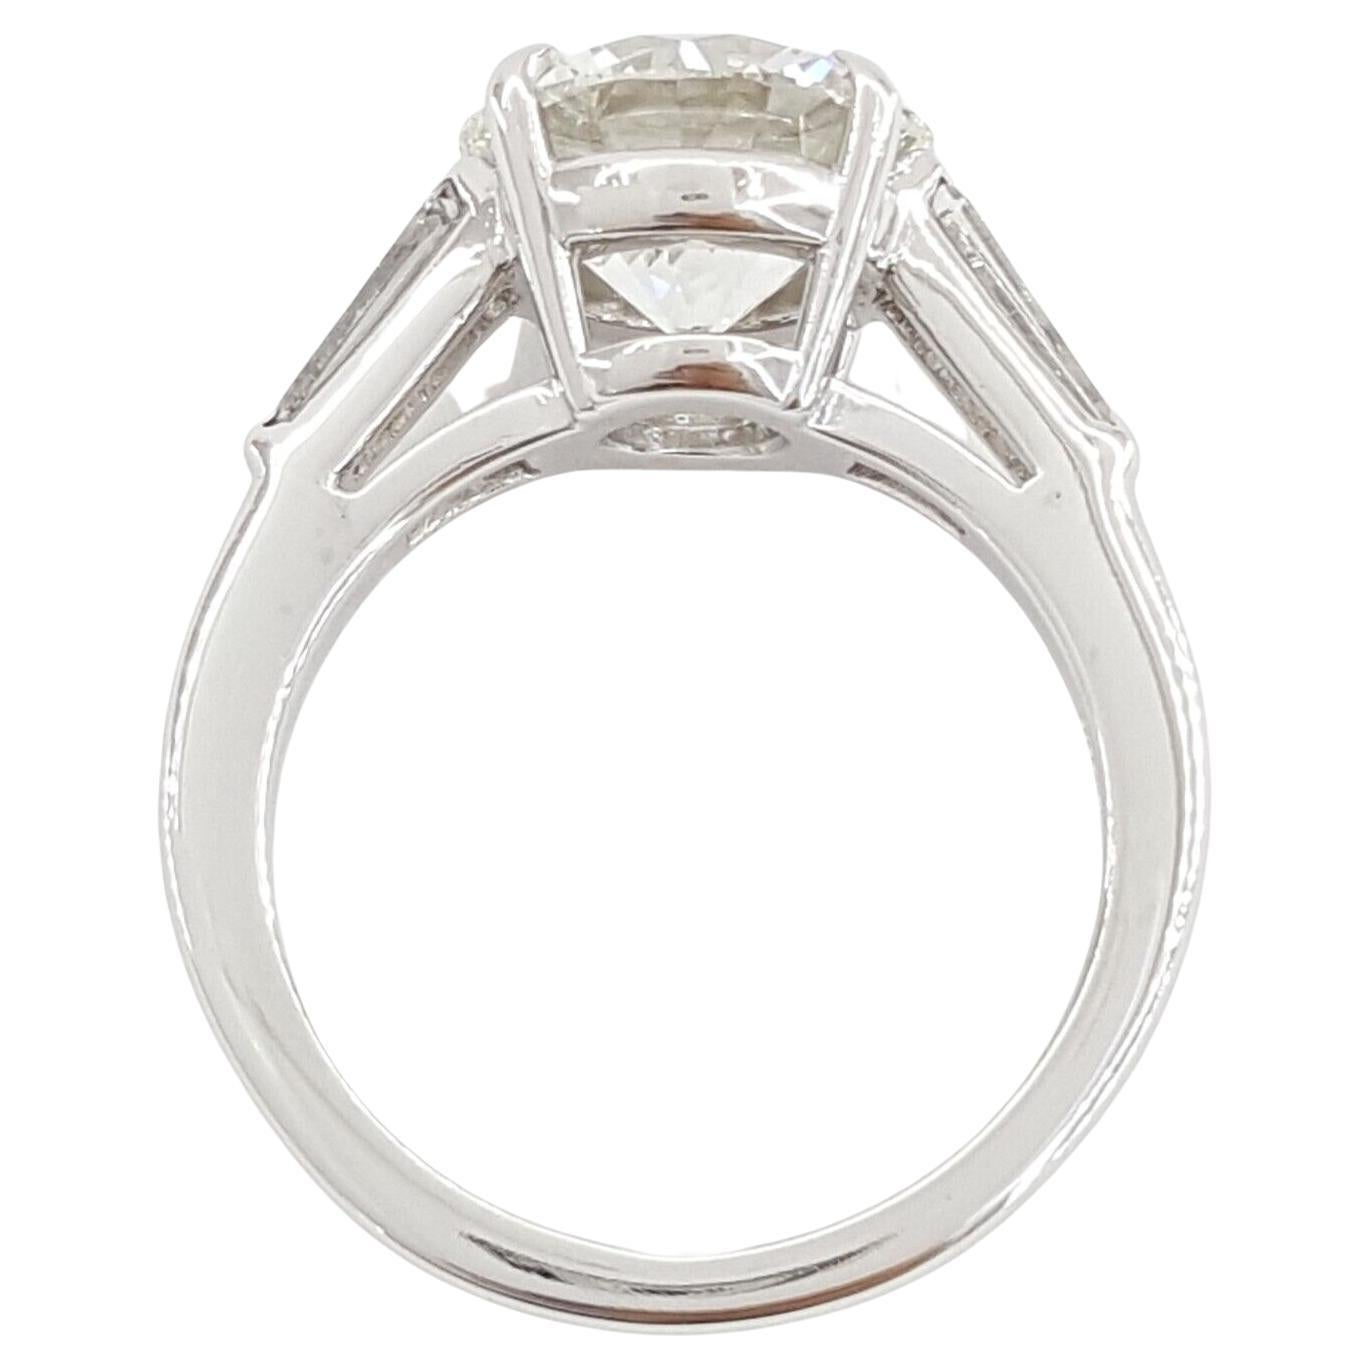 Tiffany & Co. 3.33 Carat Platinum Round Brilliant Cut Diamond Three Stone Engagement Ring. 



The ring weighs 7.9 grams, size 5.5, the center is a Natural Round Brilliant Cut diamond weighing 3.33 ct, I in Color, VS1 in Clarity w/ Specifications: